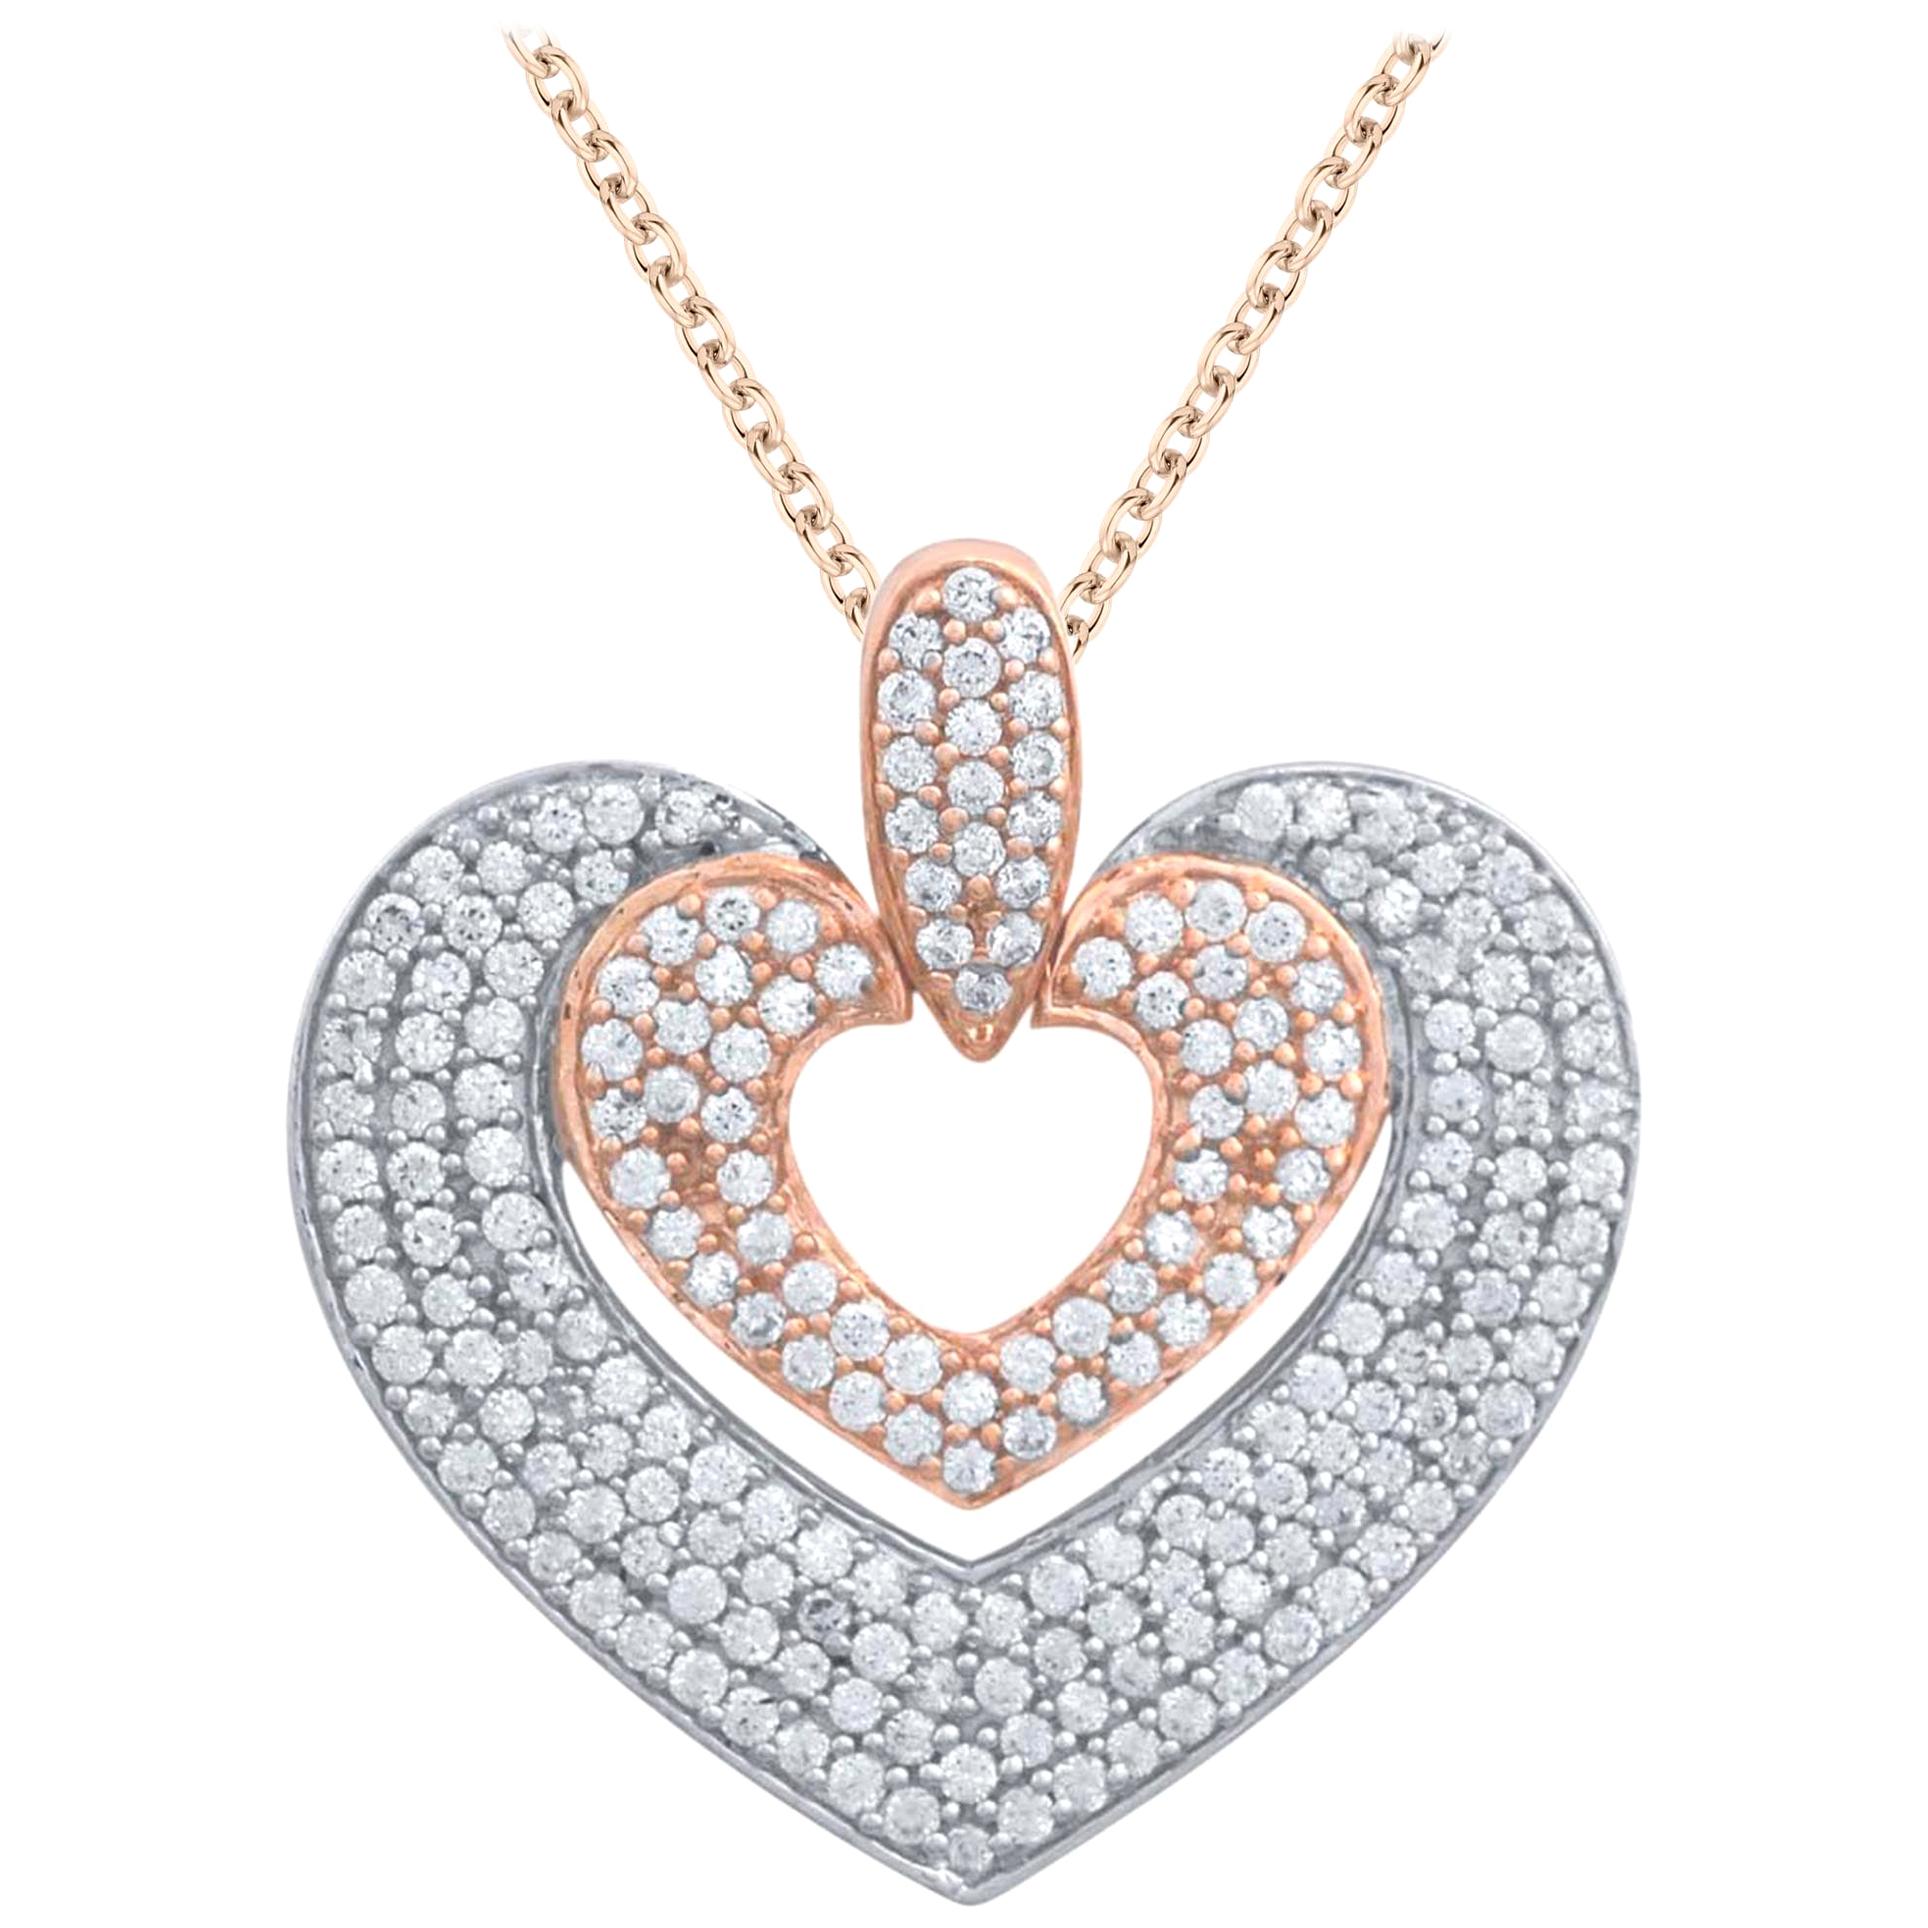 TJD 1.00Carat Diamond 14 Karat Rose Gold Double Heart Pendant with 18 inch chain For Sale